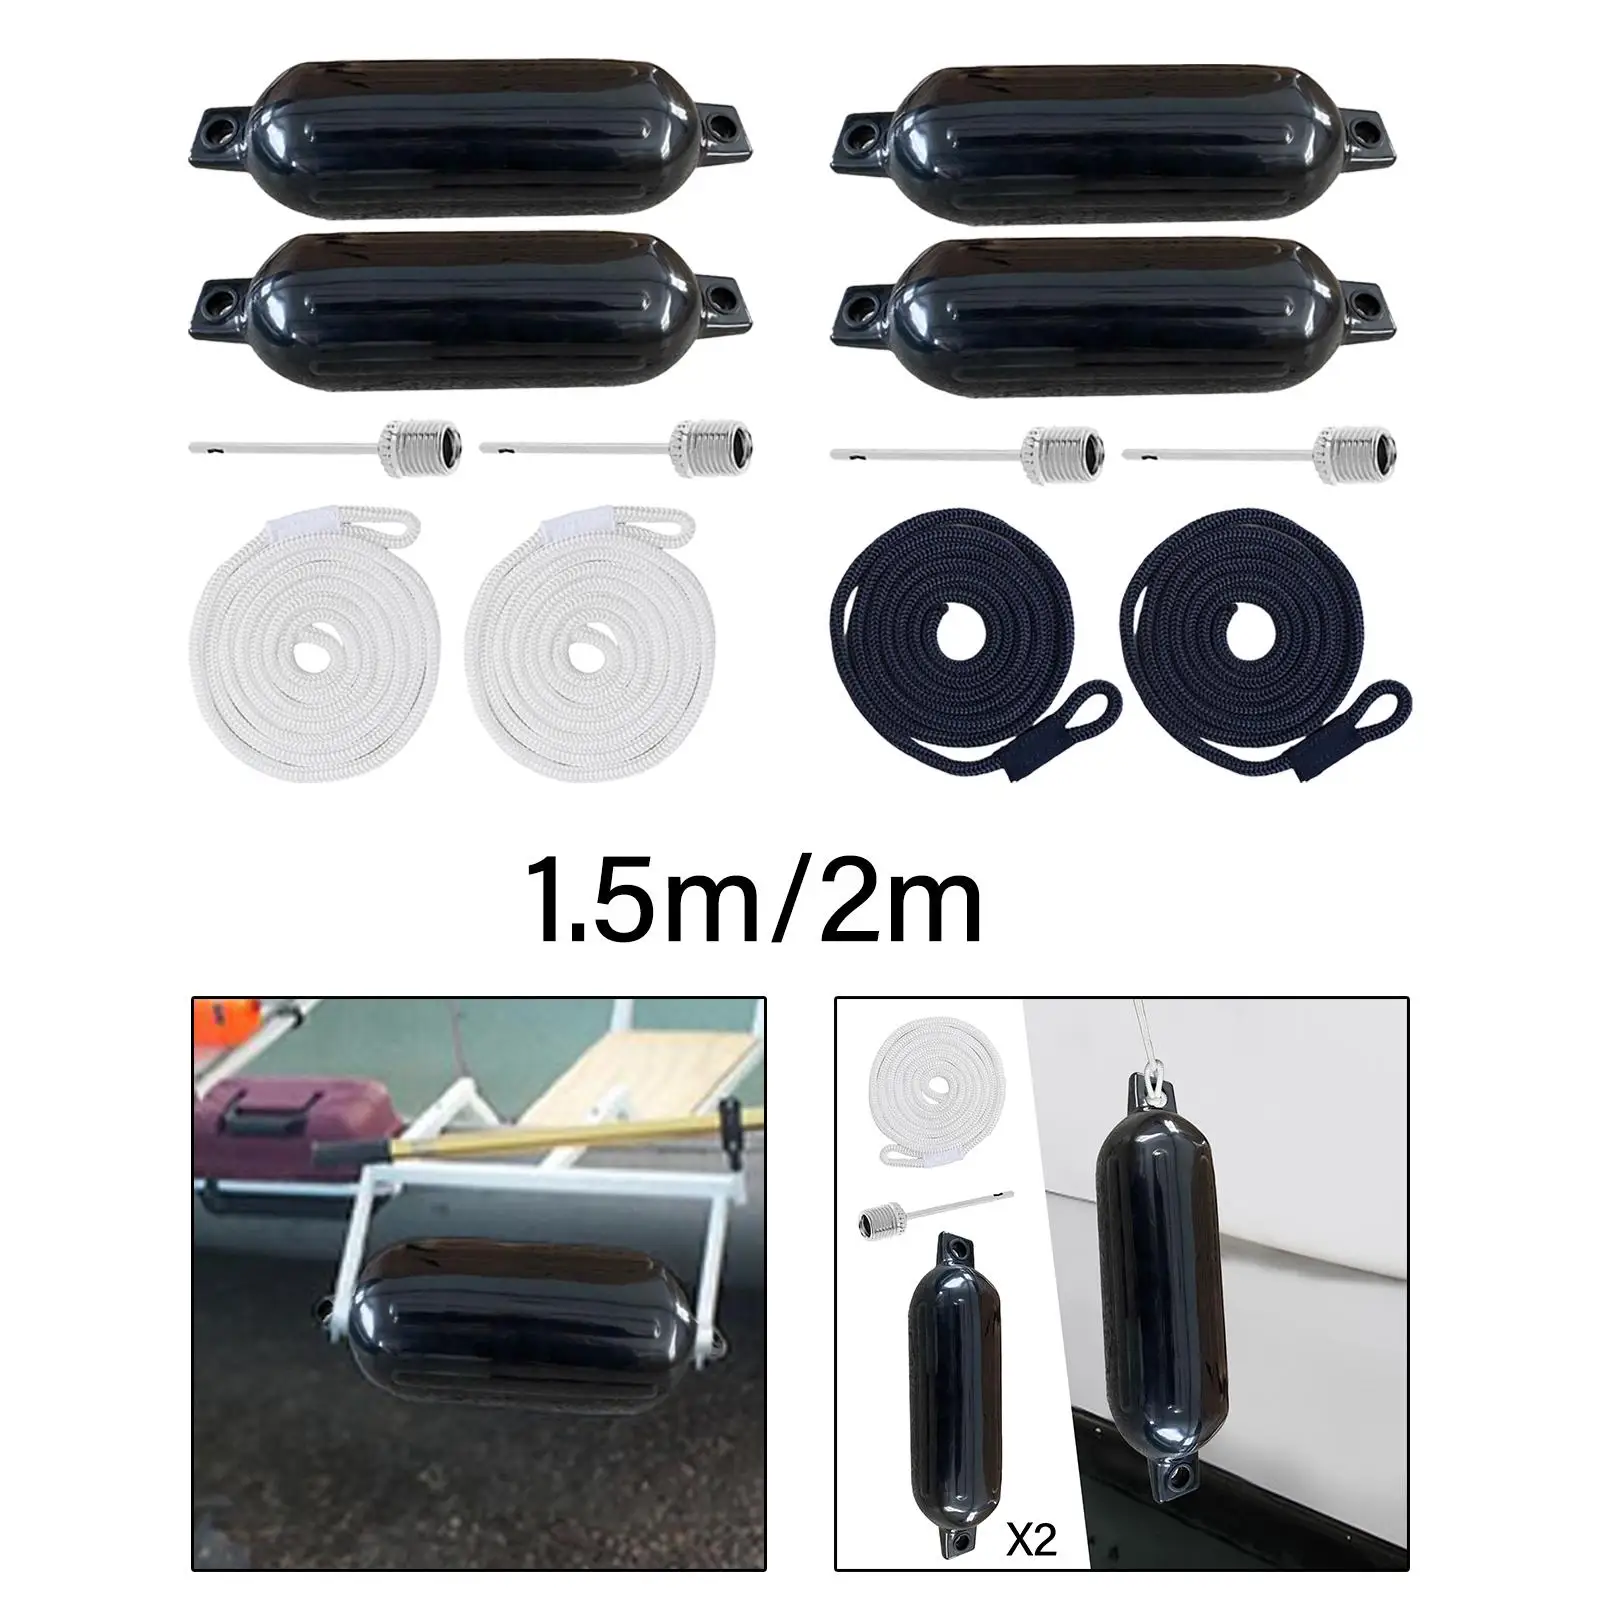 Marine Boat Fenders Boat Accessories with 2 Ropes Anti Collision Protector for Fishing Boats Docking Sailboats Pontoon